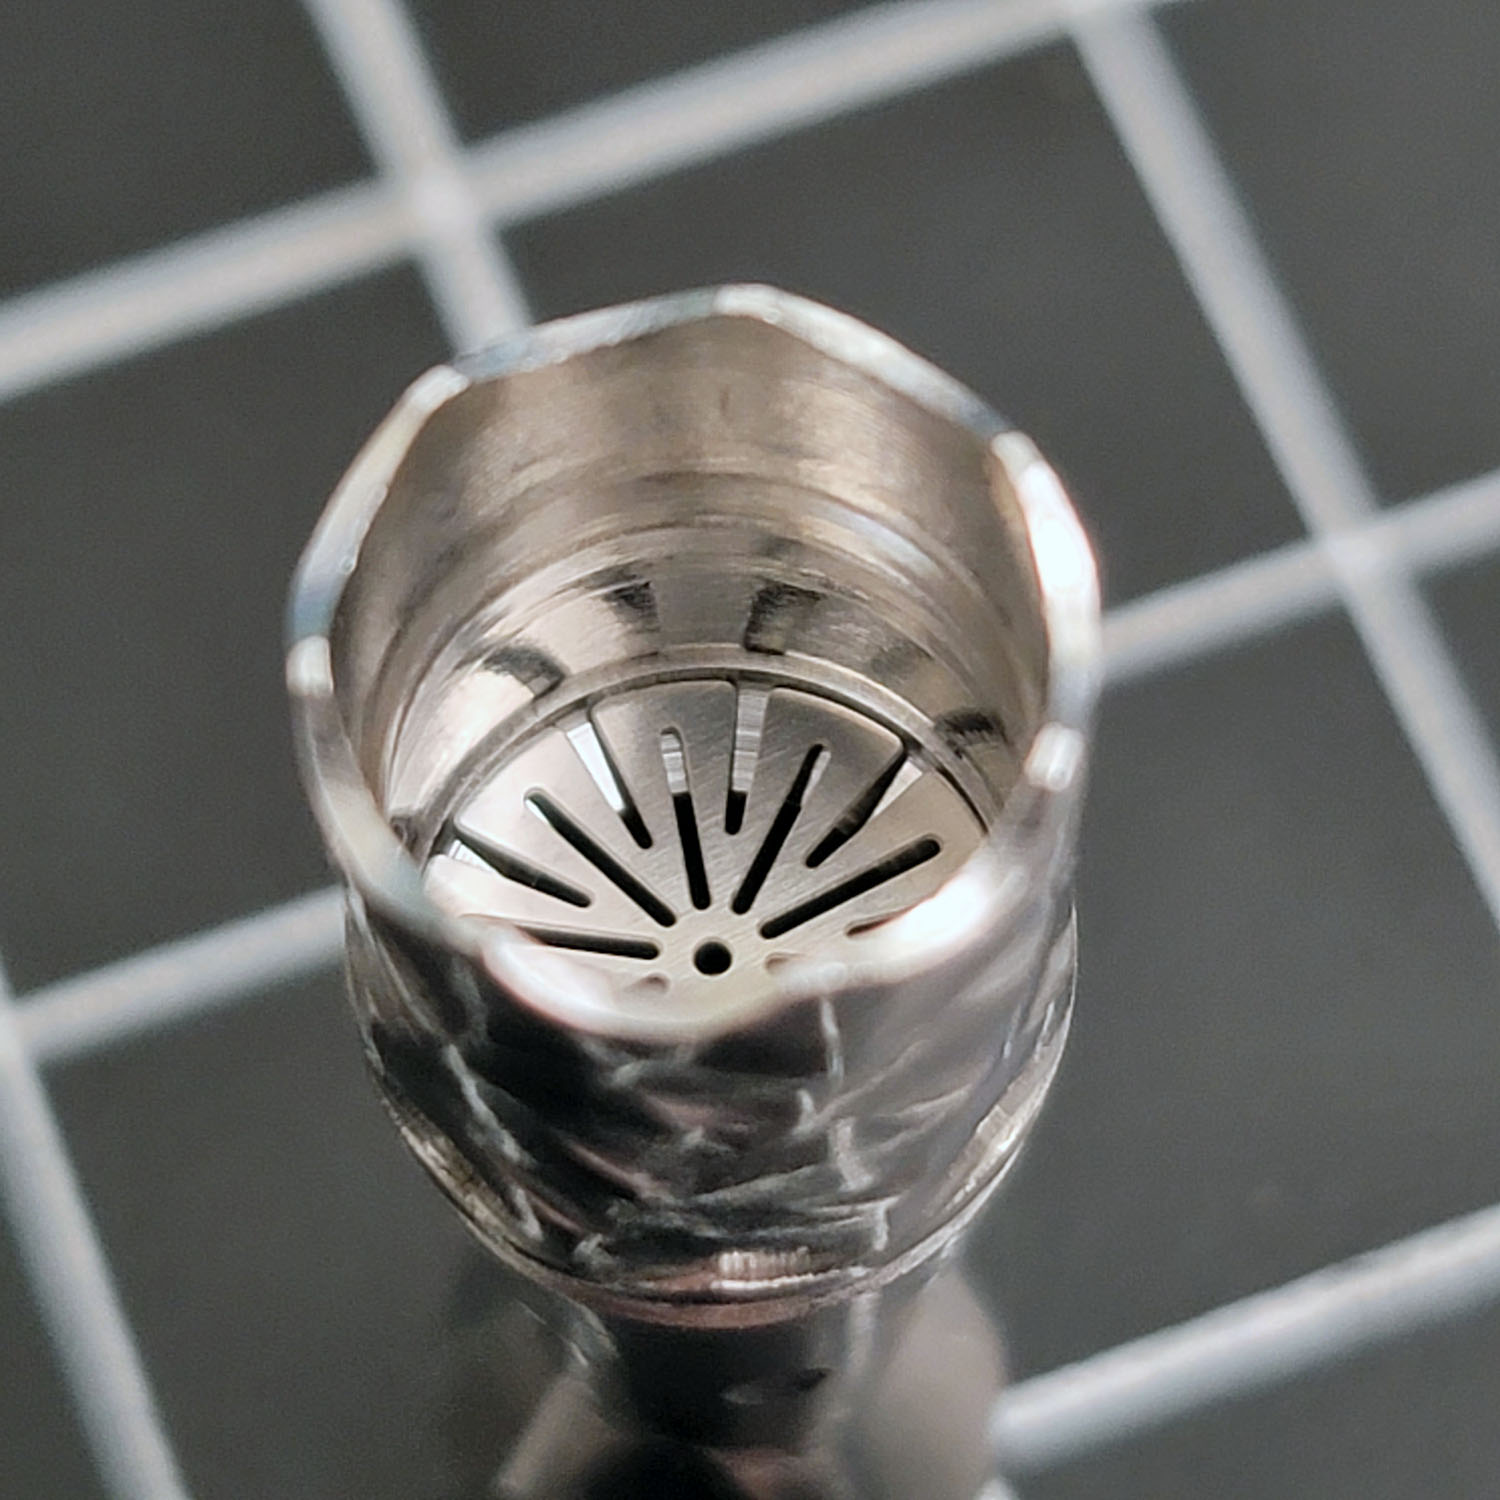 The M+ Tip has a slightly larger bowl area than previous Dynavap tips